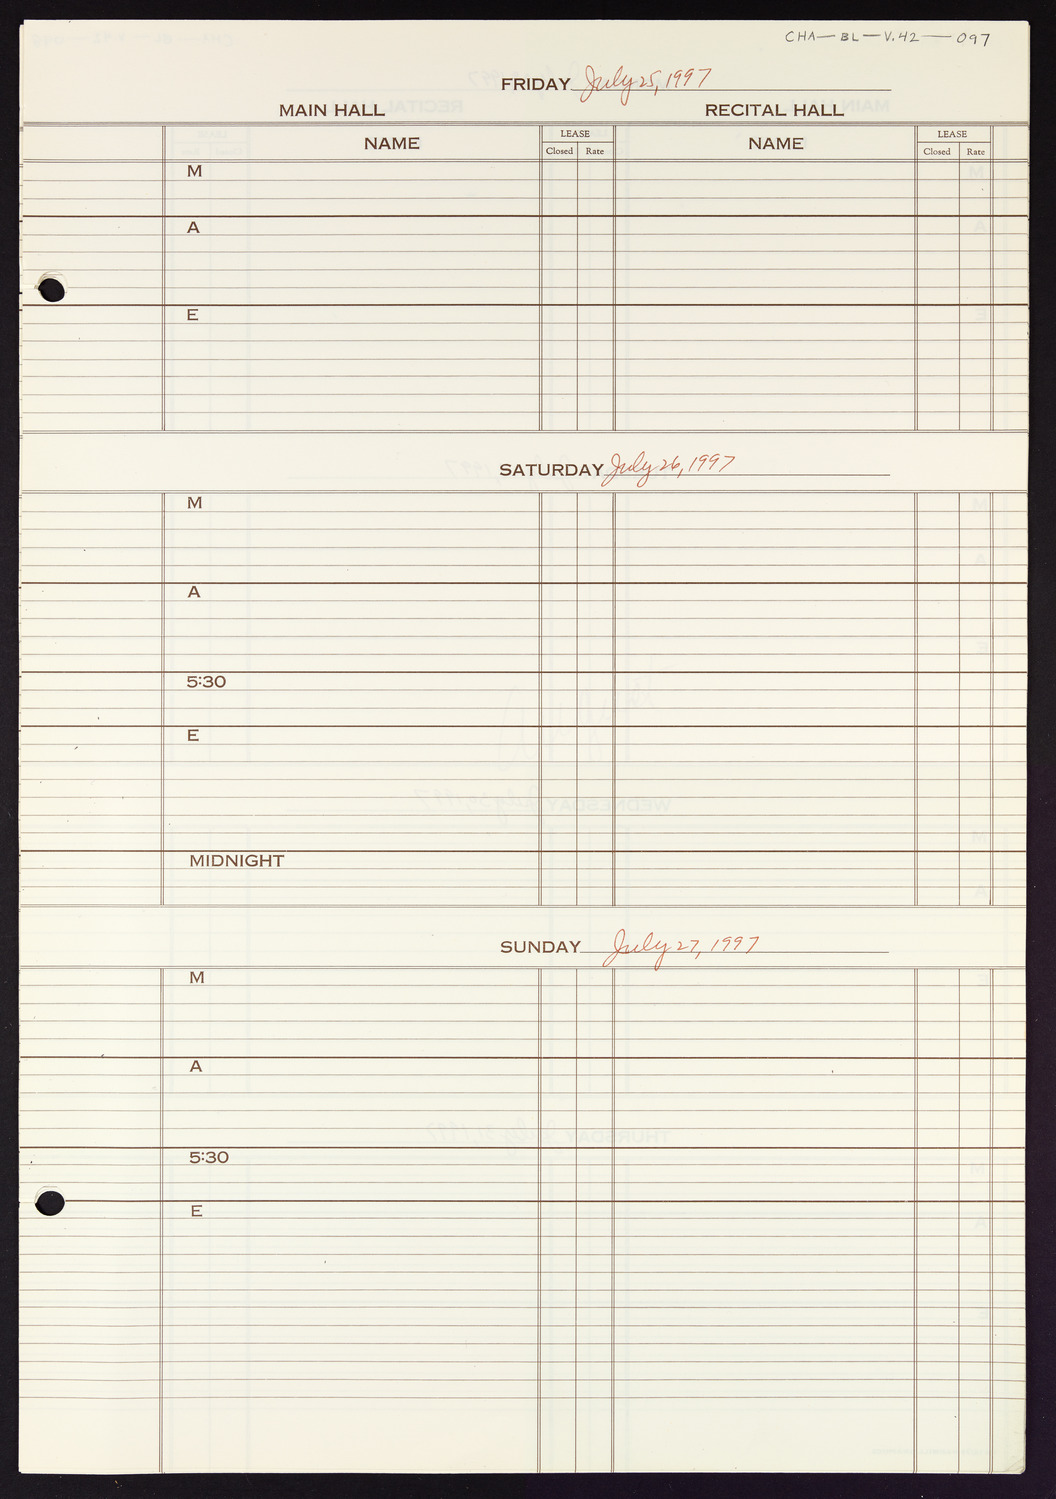 Carnegie Hall Booking Ledger, volume 42, page 97